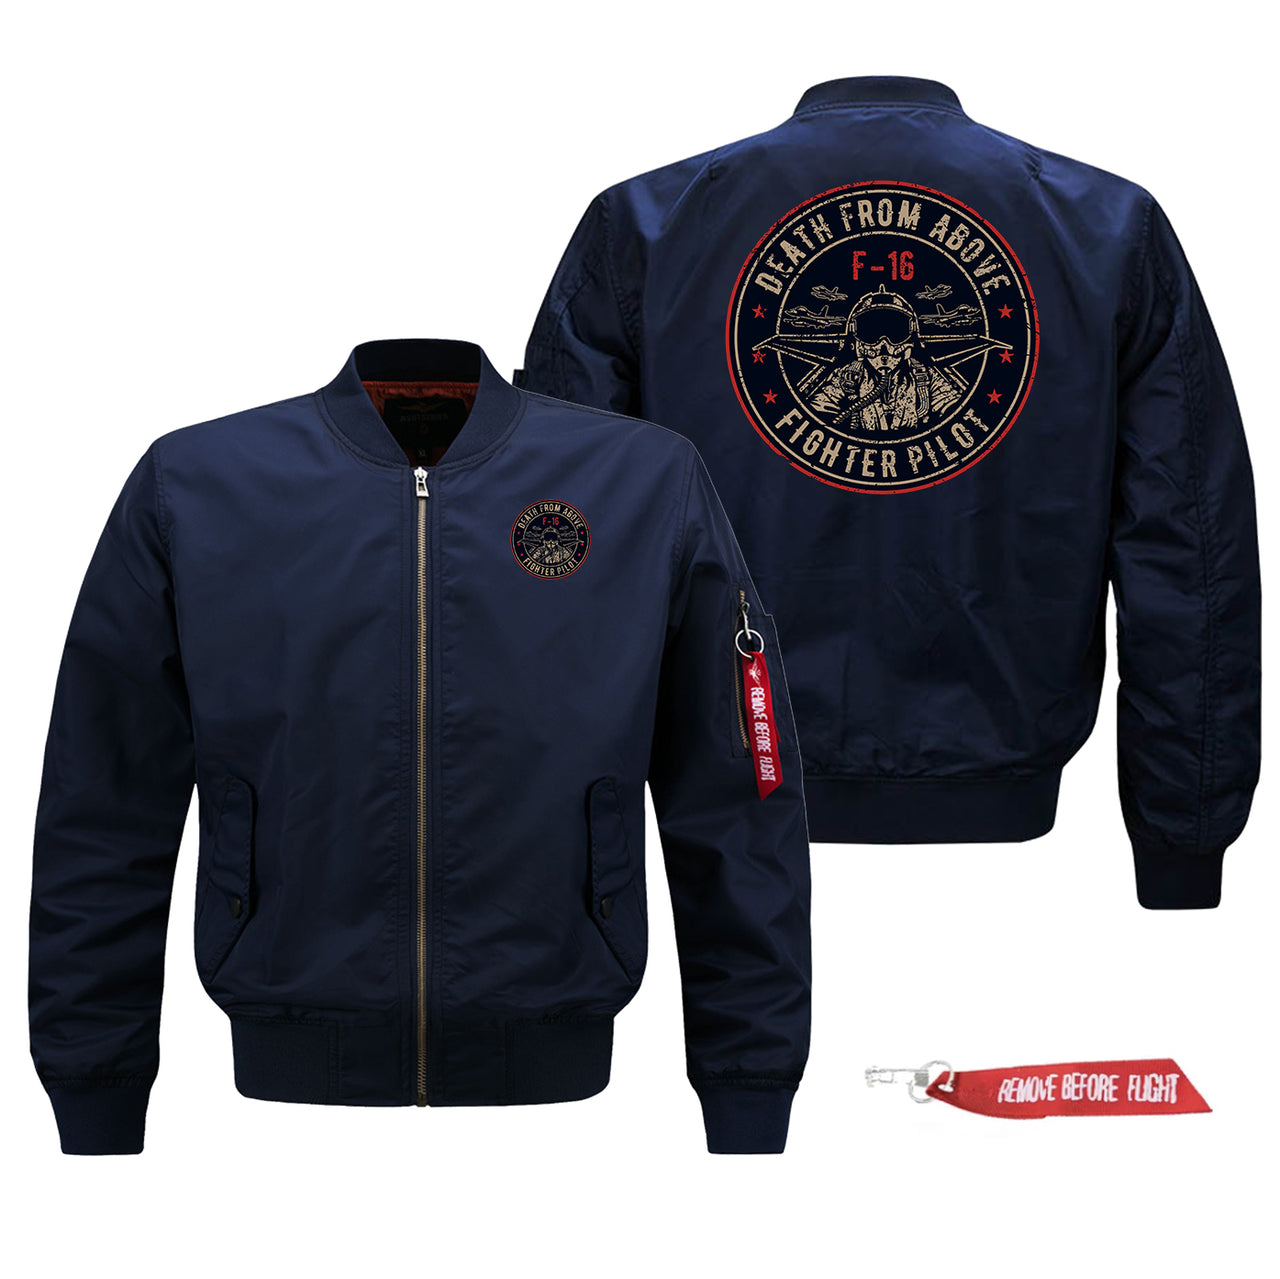 Fighting Falcon F16 - Death From Above Designed Pilot Jackets (Customizable)